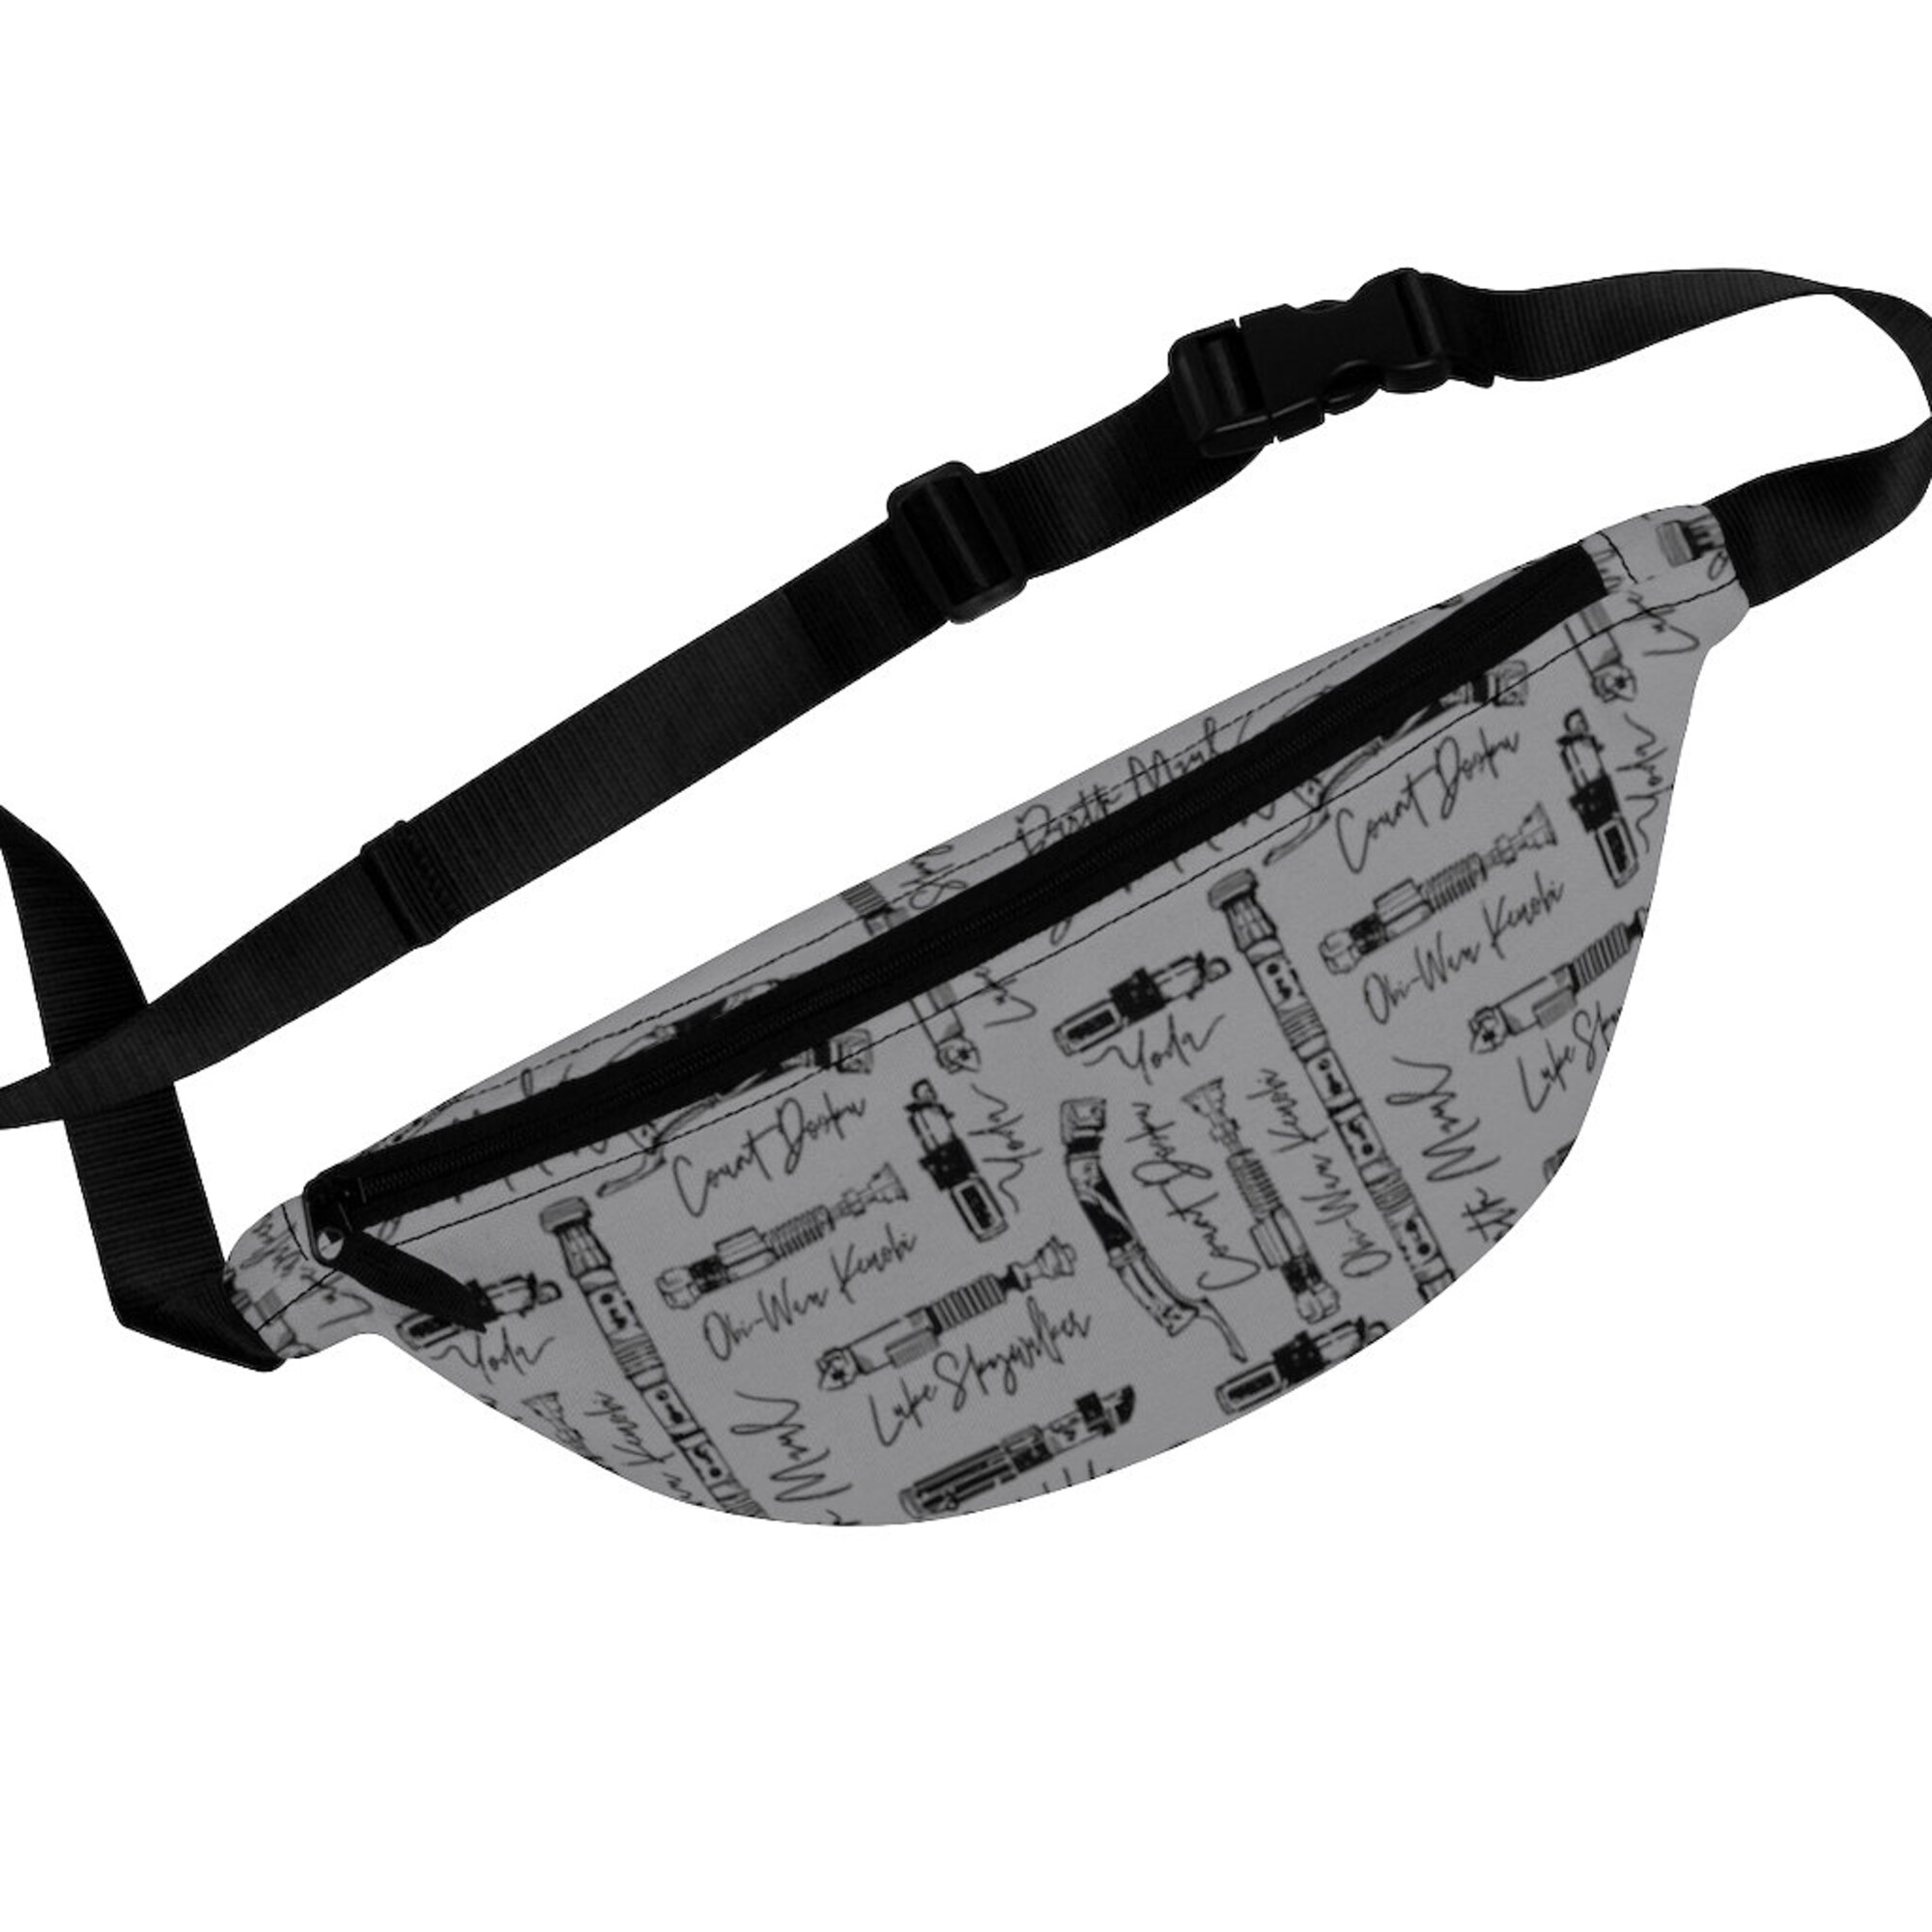 Lightsabers Fanny Pack, Star Wars Fanny Pack